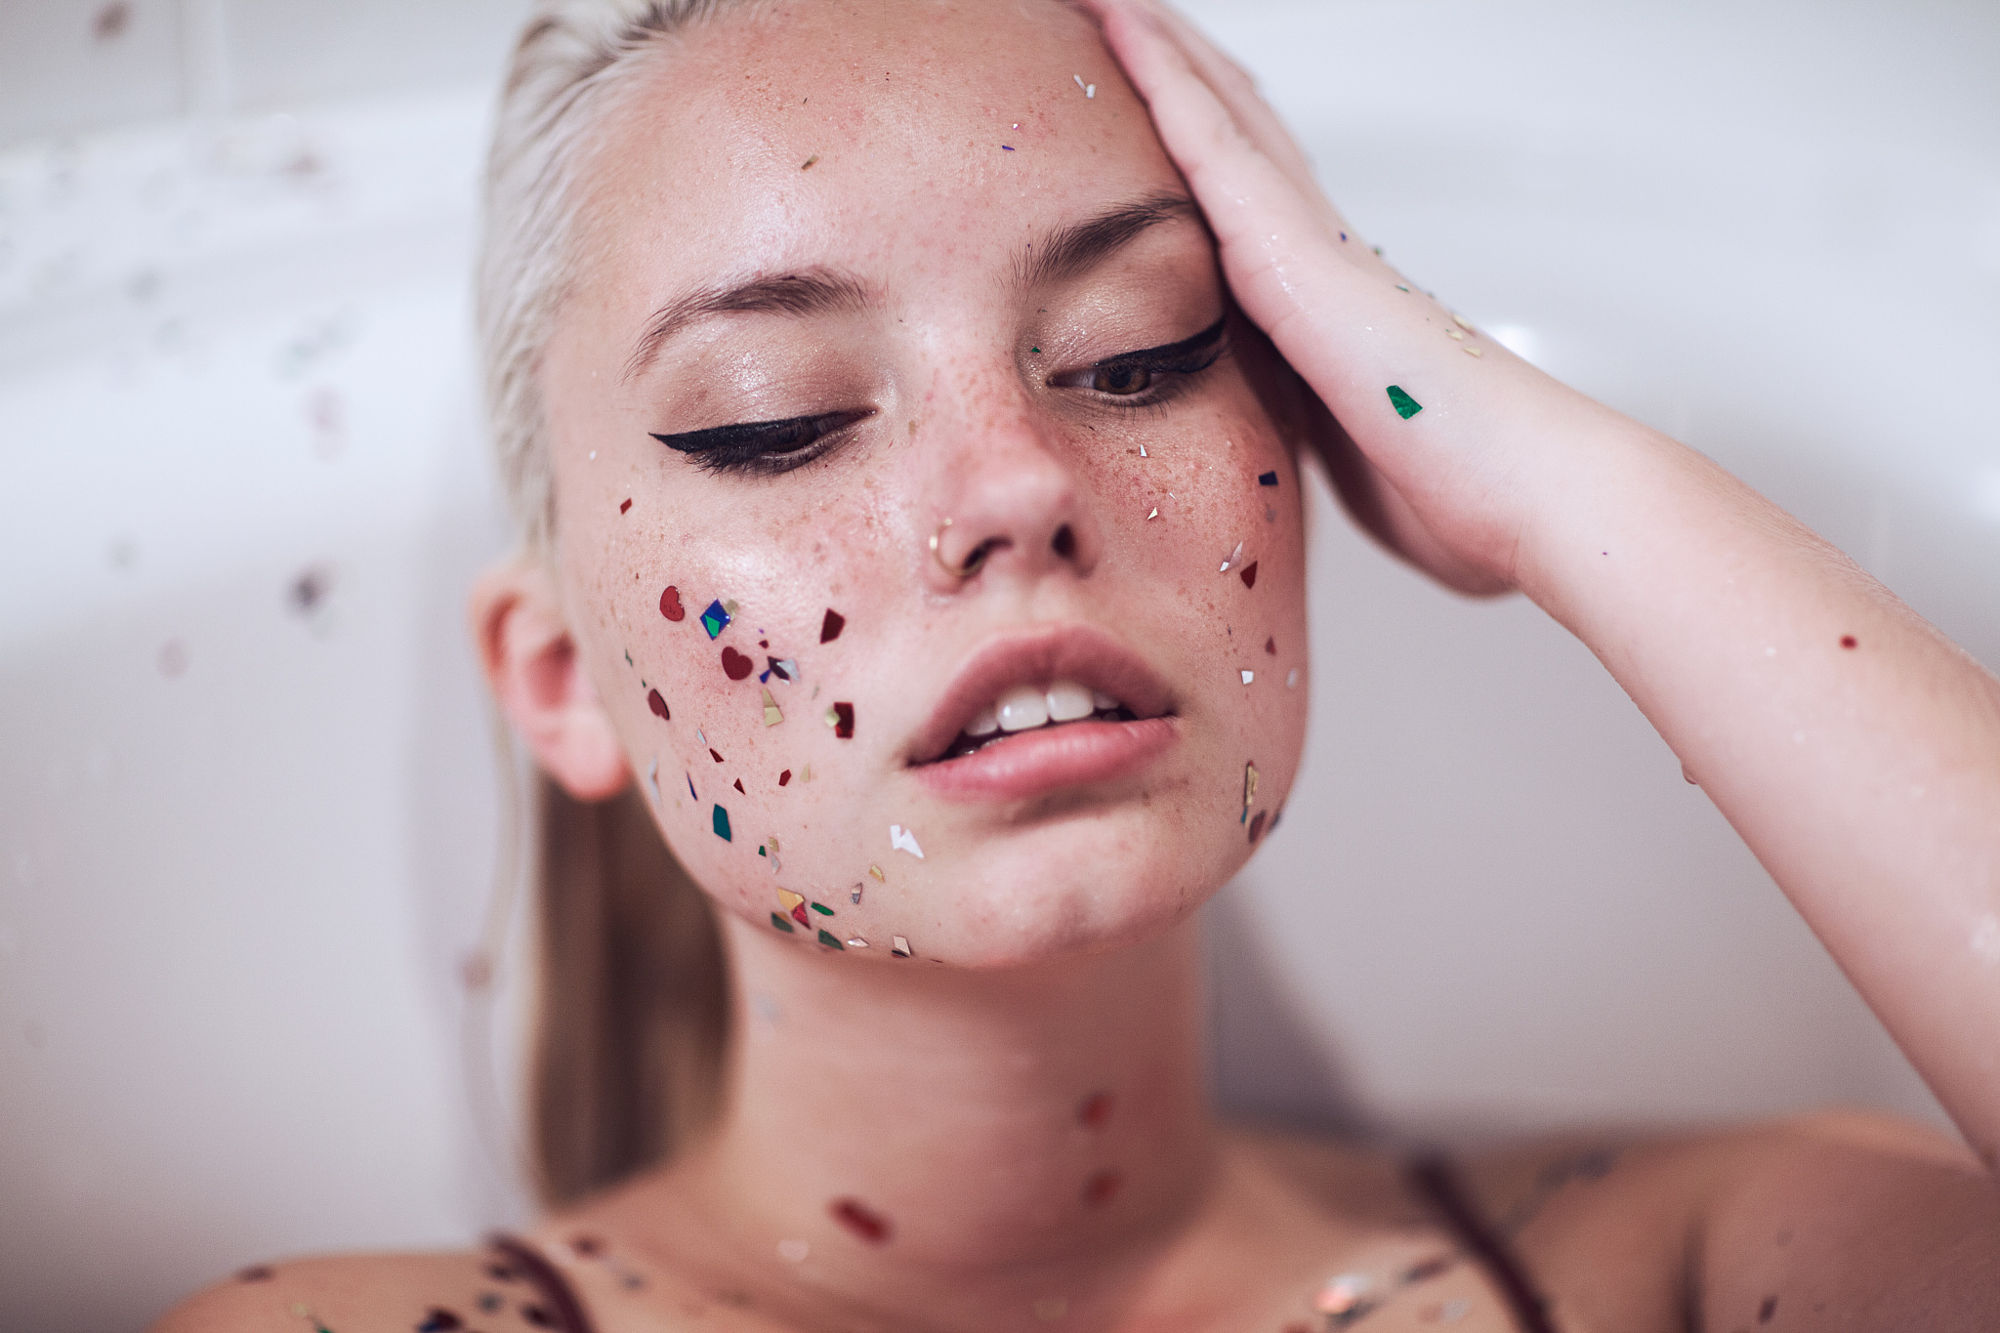 PC Wallpapers women, face, blonde, brown eyes, confetti, freckles, model